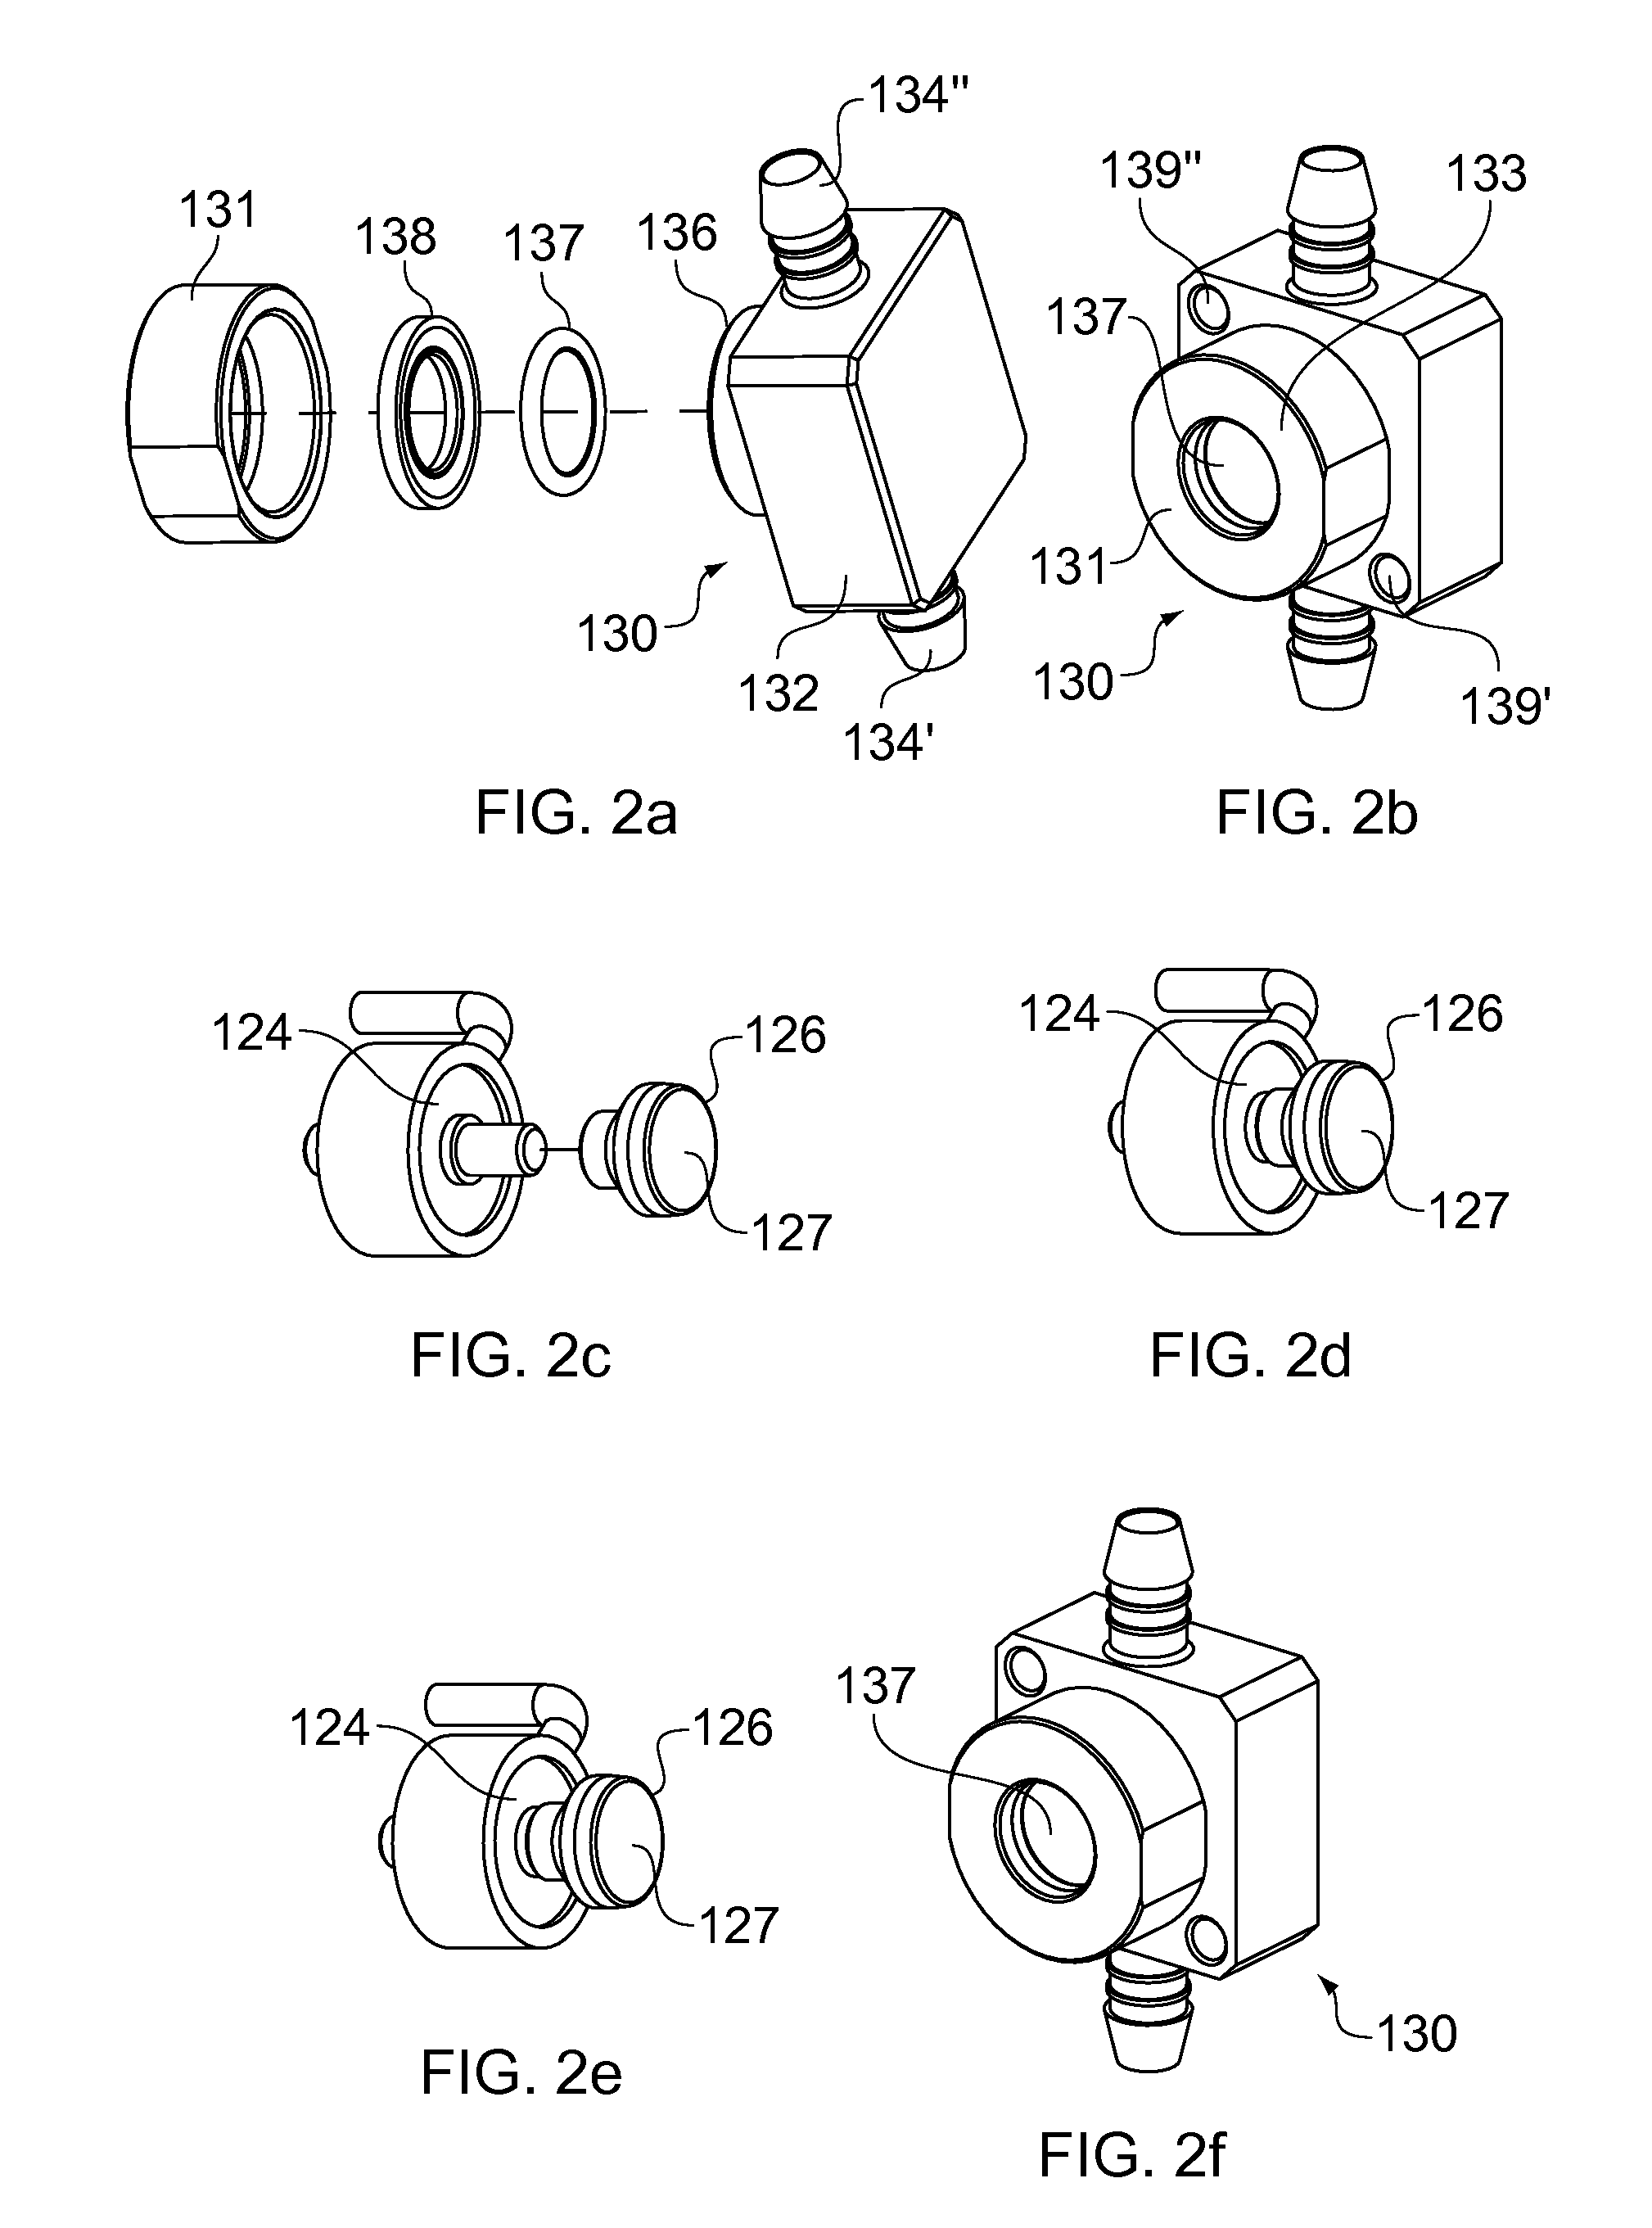 Multi-component part transducer assembly and a method for determining the pressure of a fluid using the transducer